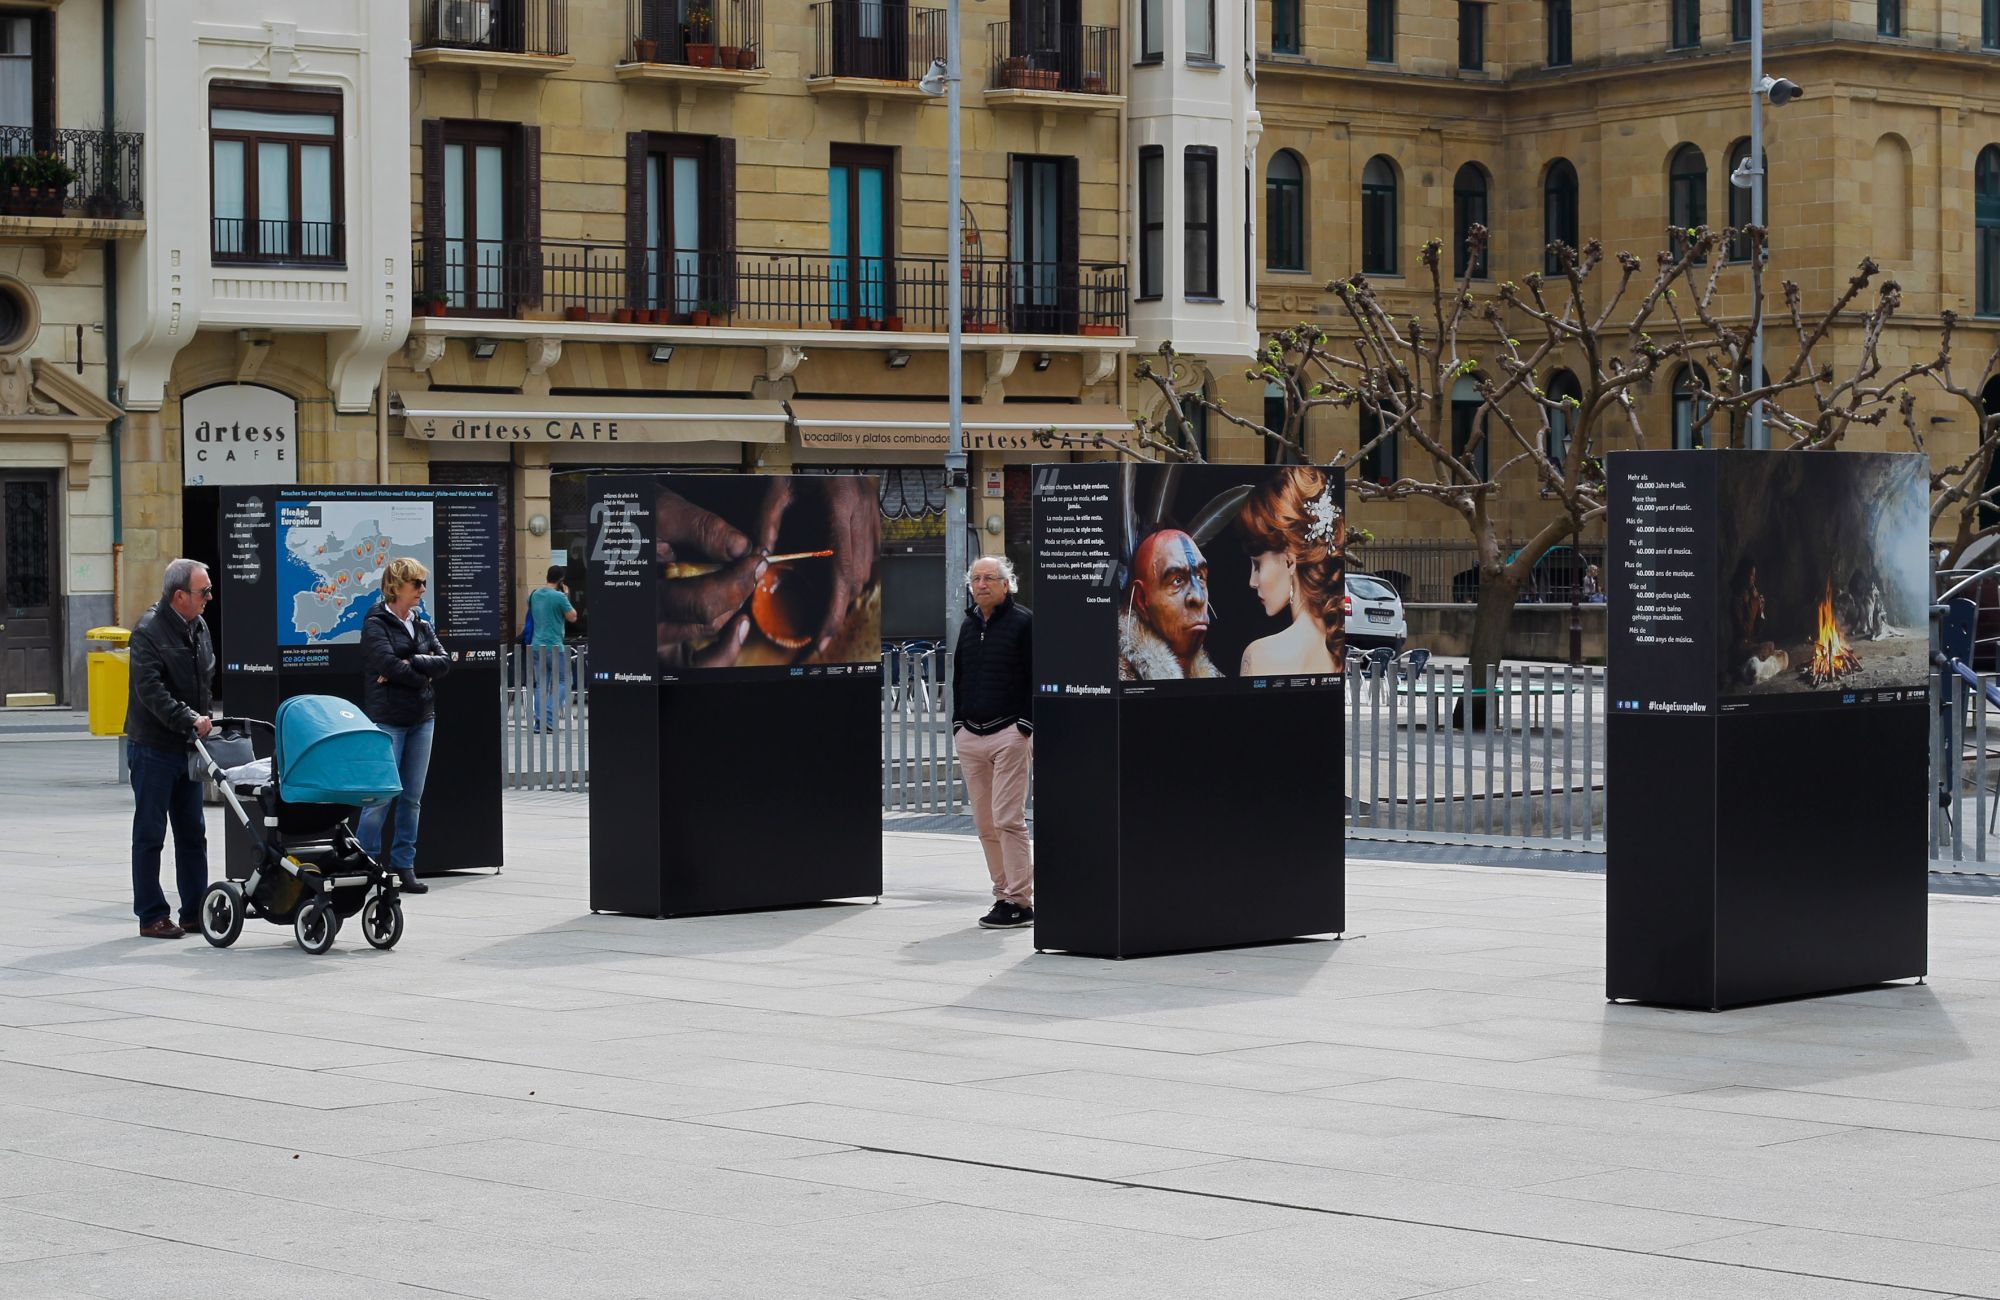 Large photo panels outside in an urban setting, with some visitors